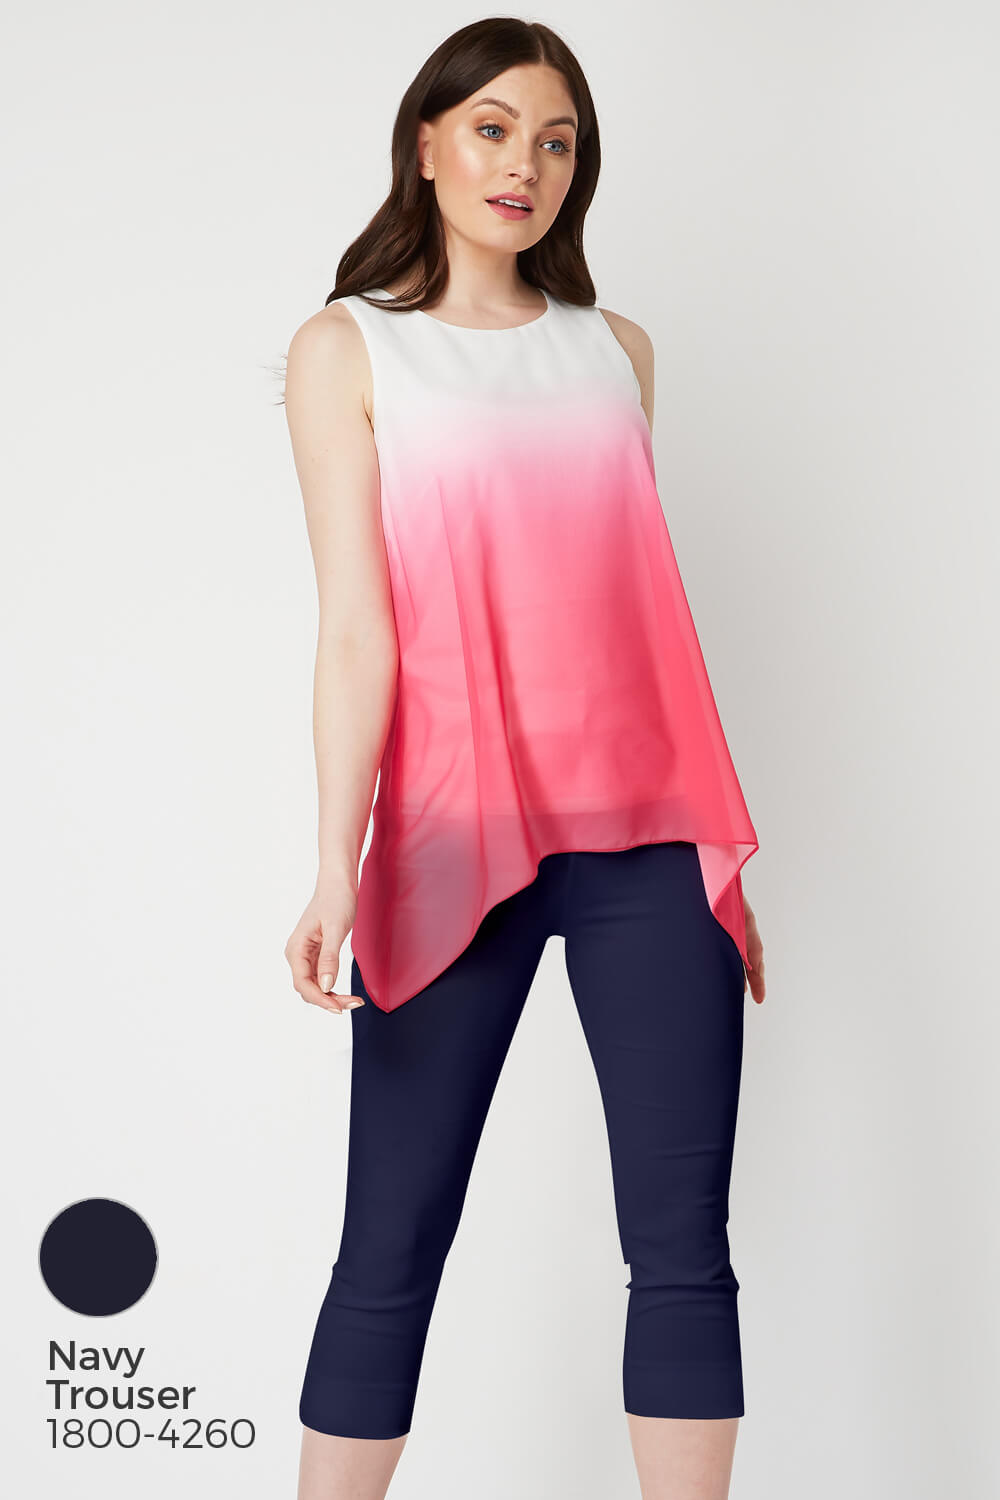 PINK Ombre Print Overlay Top, Image 6 of 8